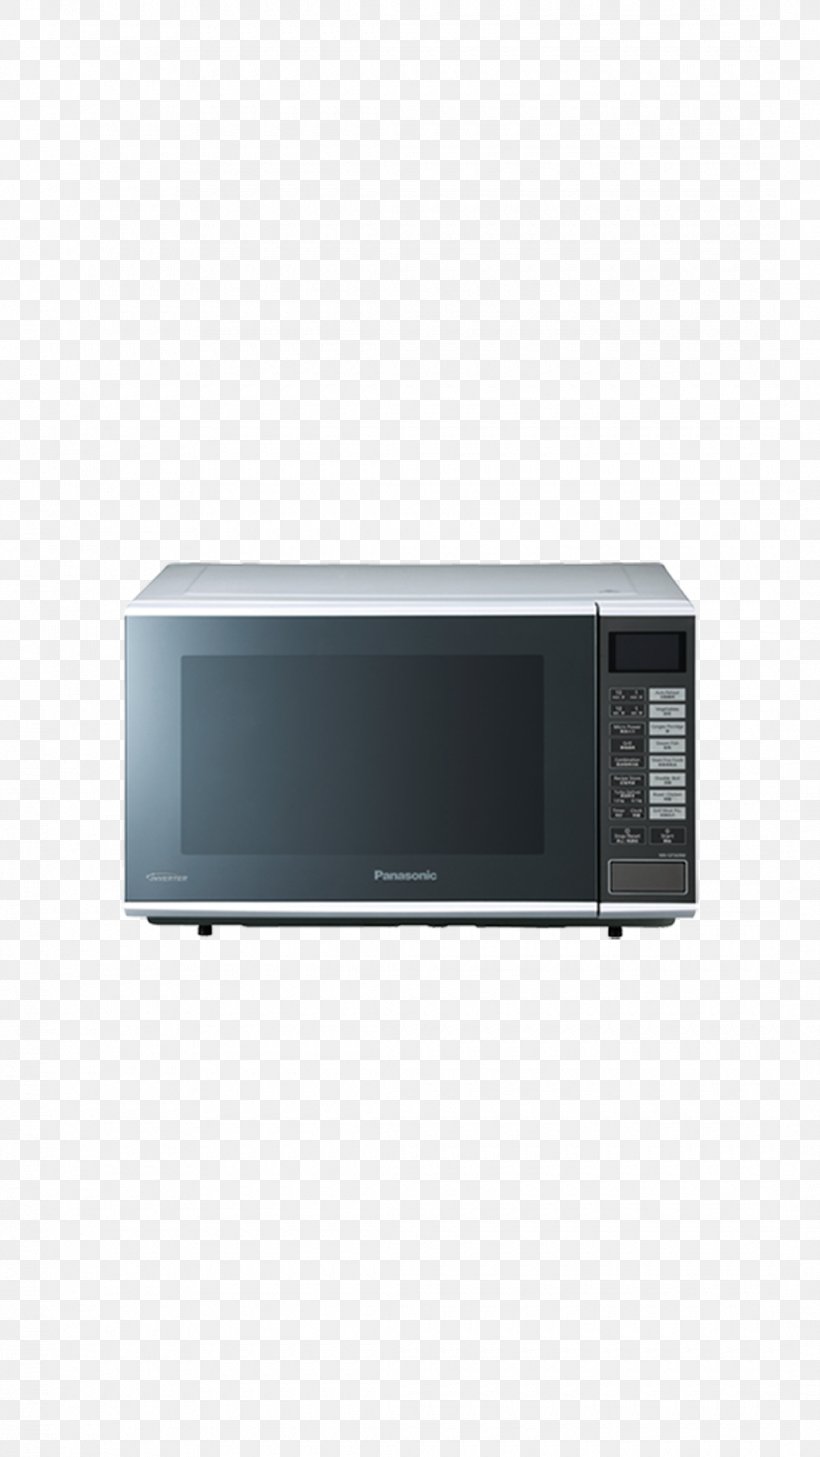 Panasonic Microwave Ovens Convection Microwave Kitchen, PNG, 1080x1920px, Panasonic, Convection Microwave, Convection Oven, Cooking, Electronics Download Free